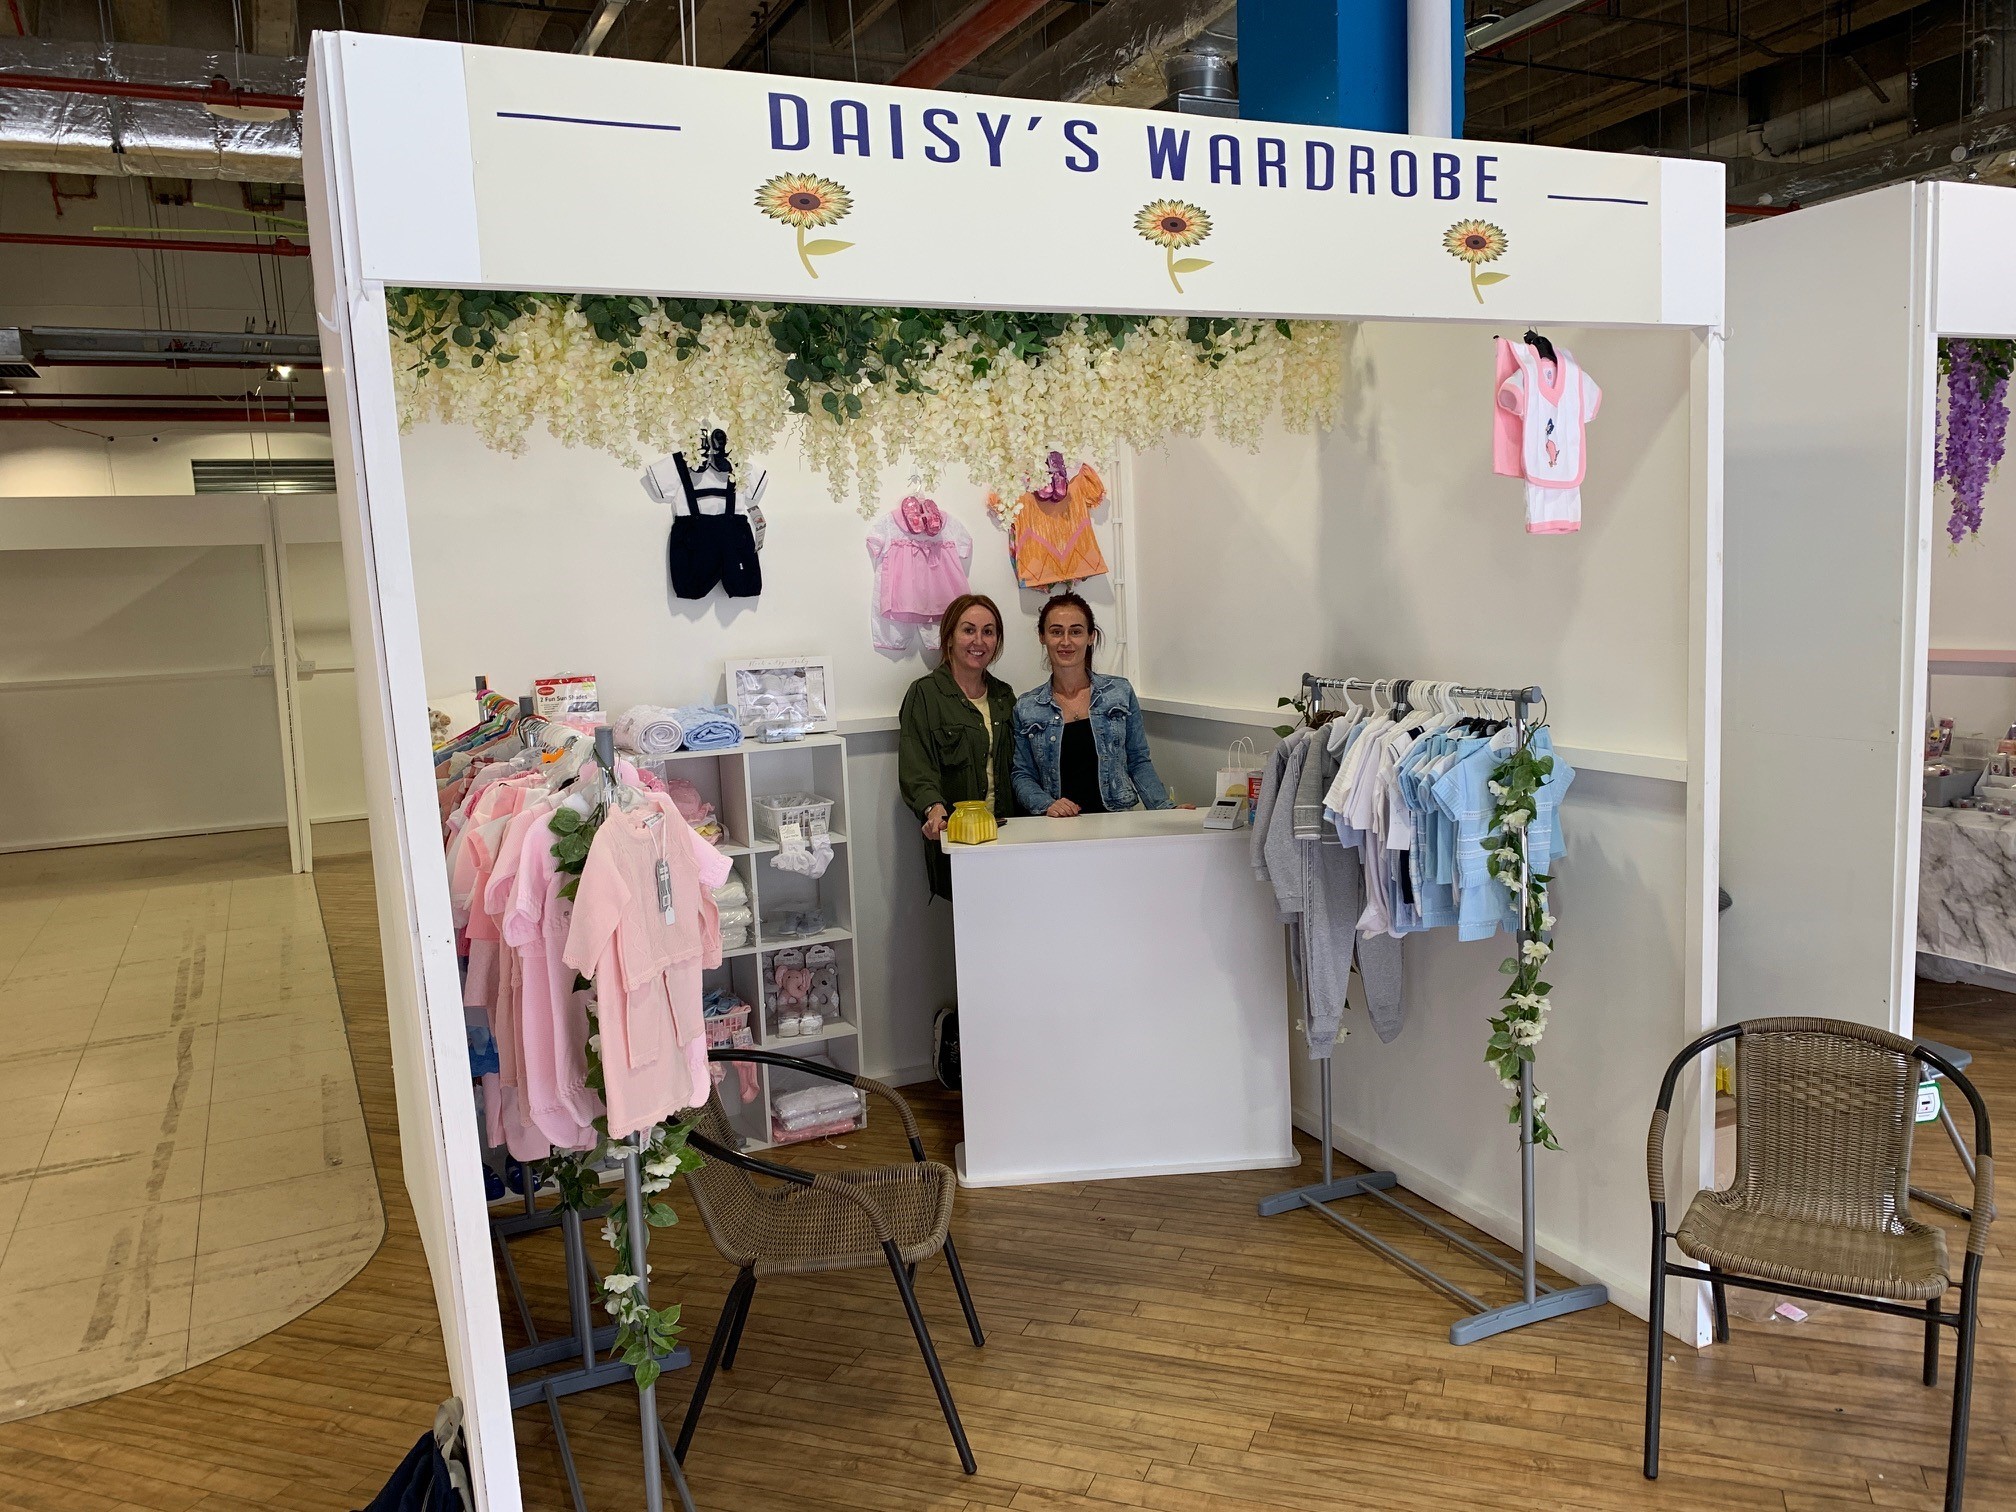 Sophie and Justine at their babywear stall, Daisy's Wardrobe